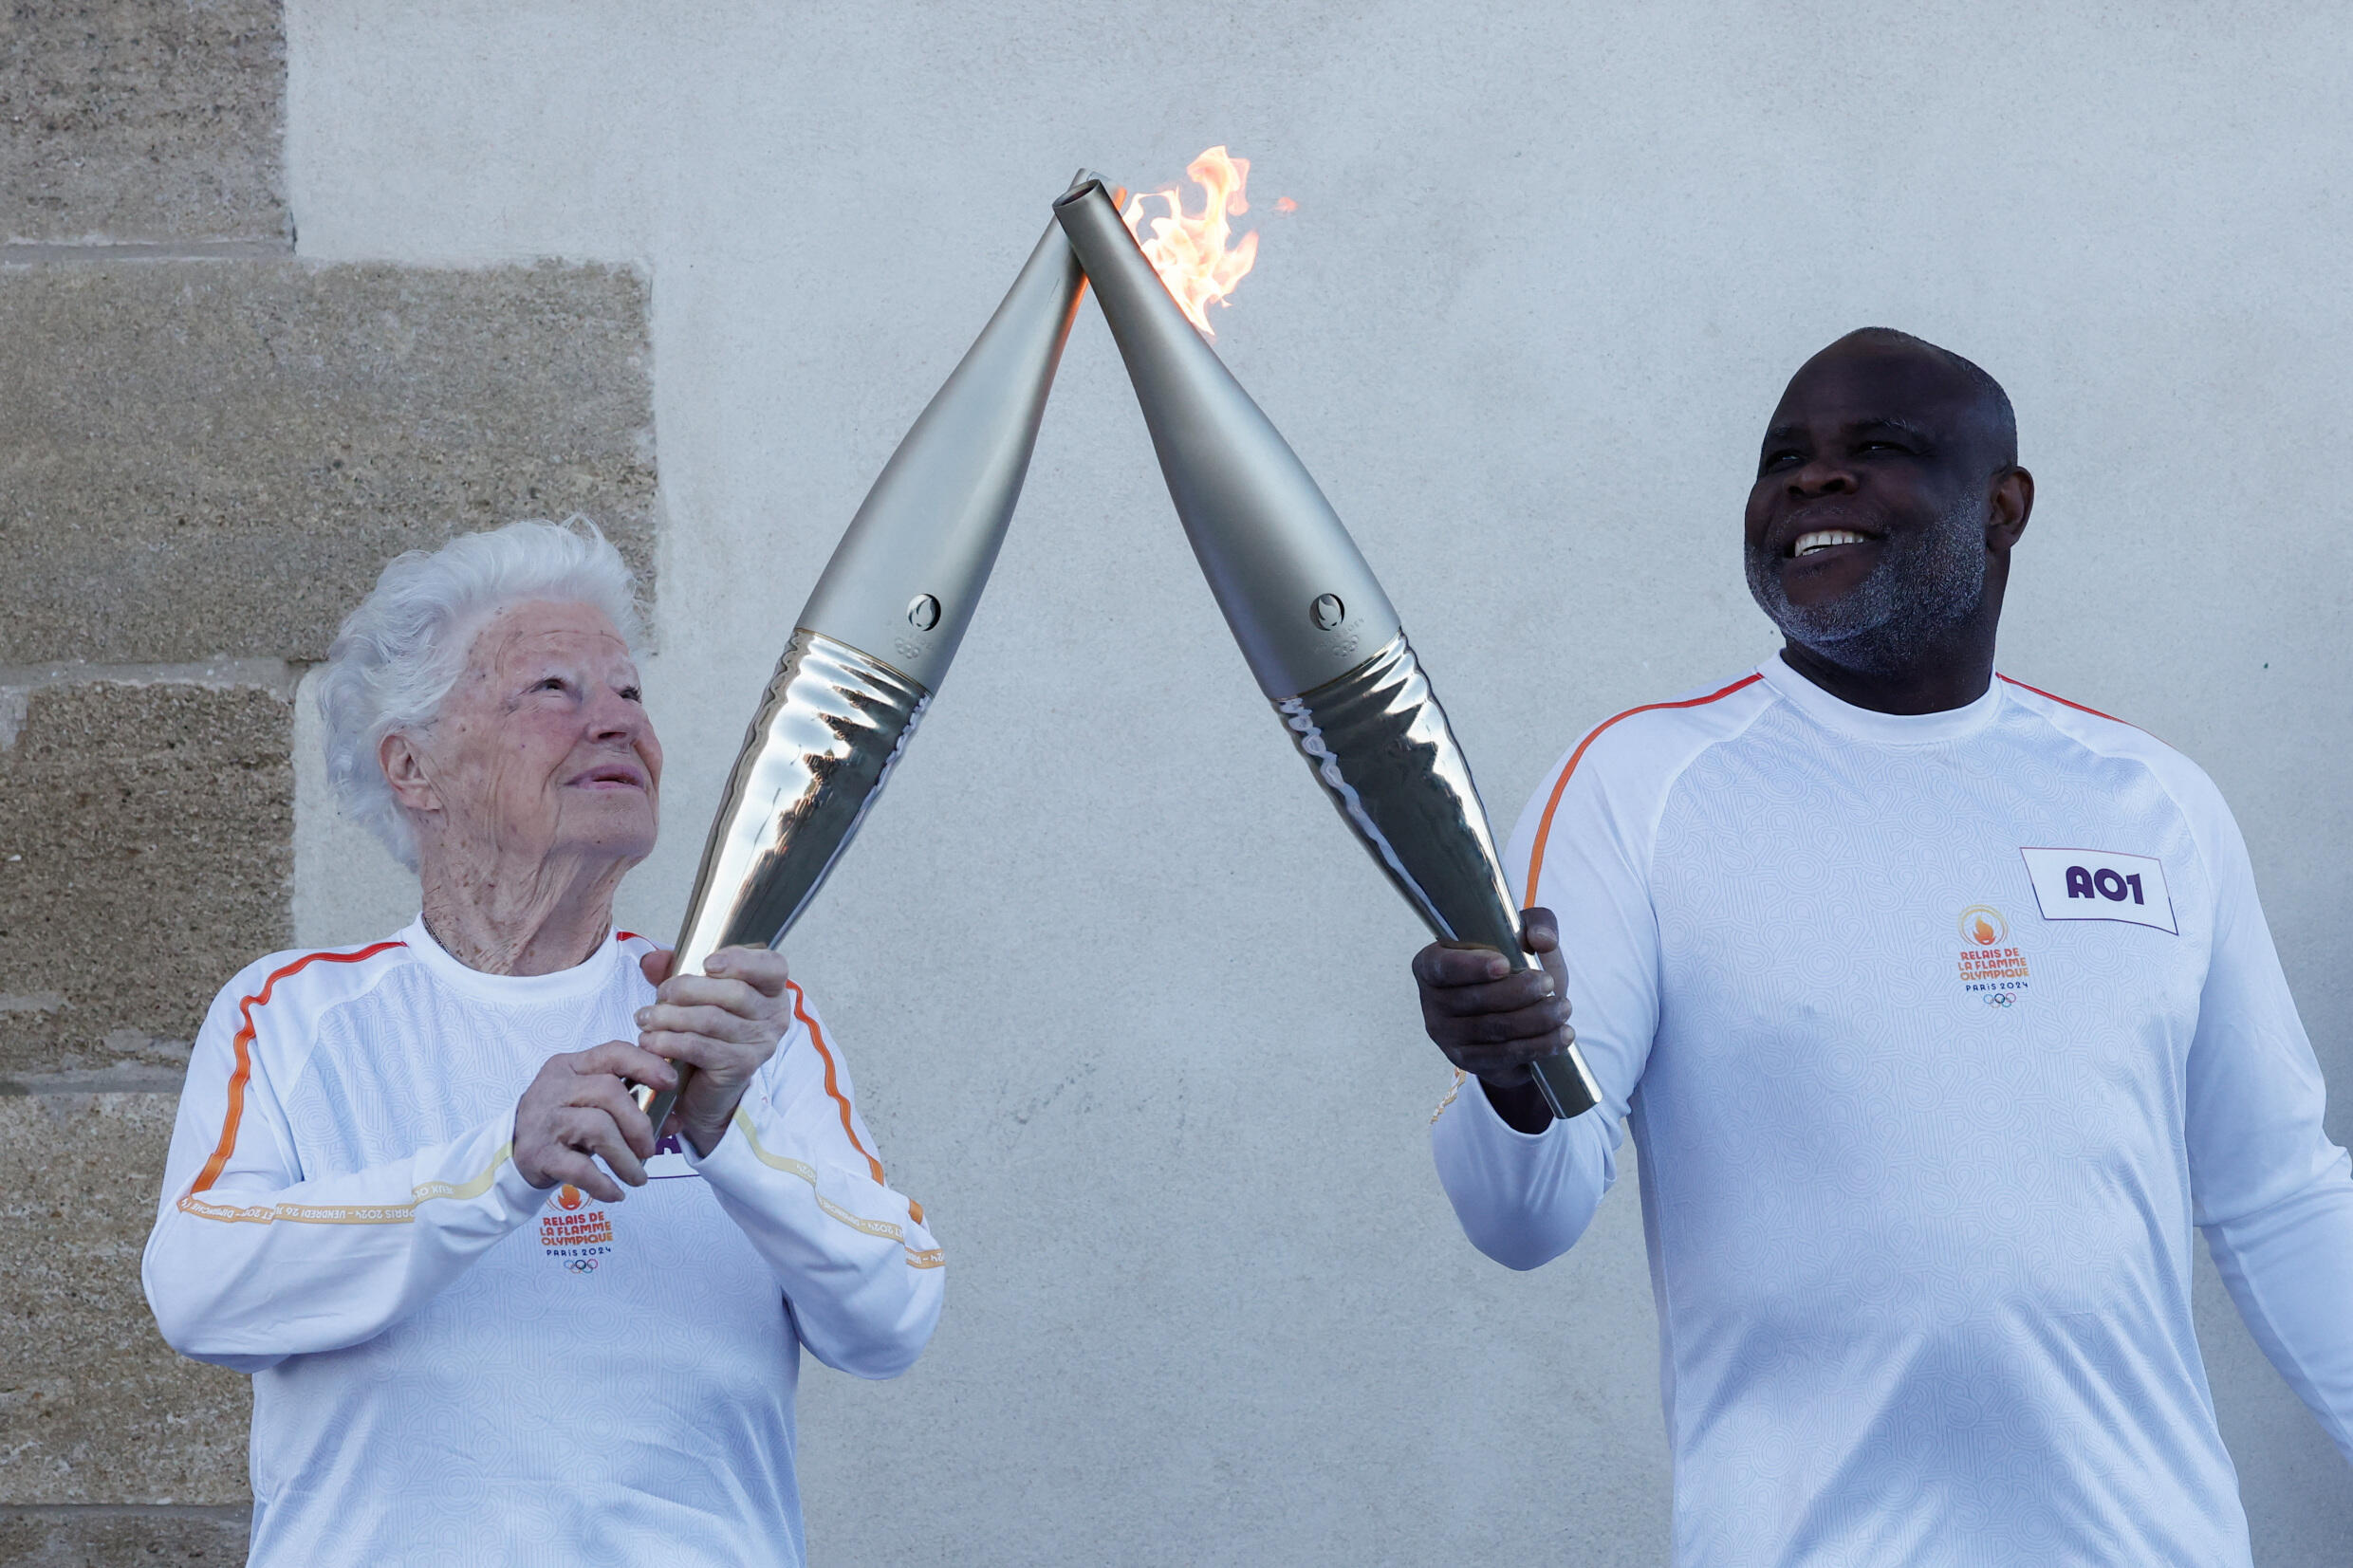 Colette Cataldo receives the Olympic torch from former French soccer player Basile Boli during the relay ahead of the Paris 2024 Olympic Games in Marseille, France, May 9, 2024.